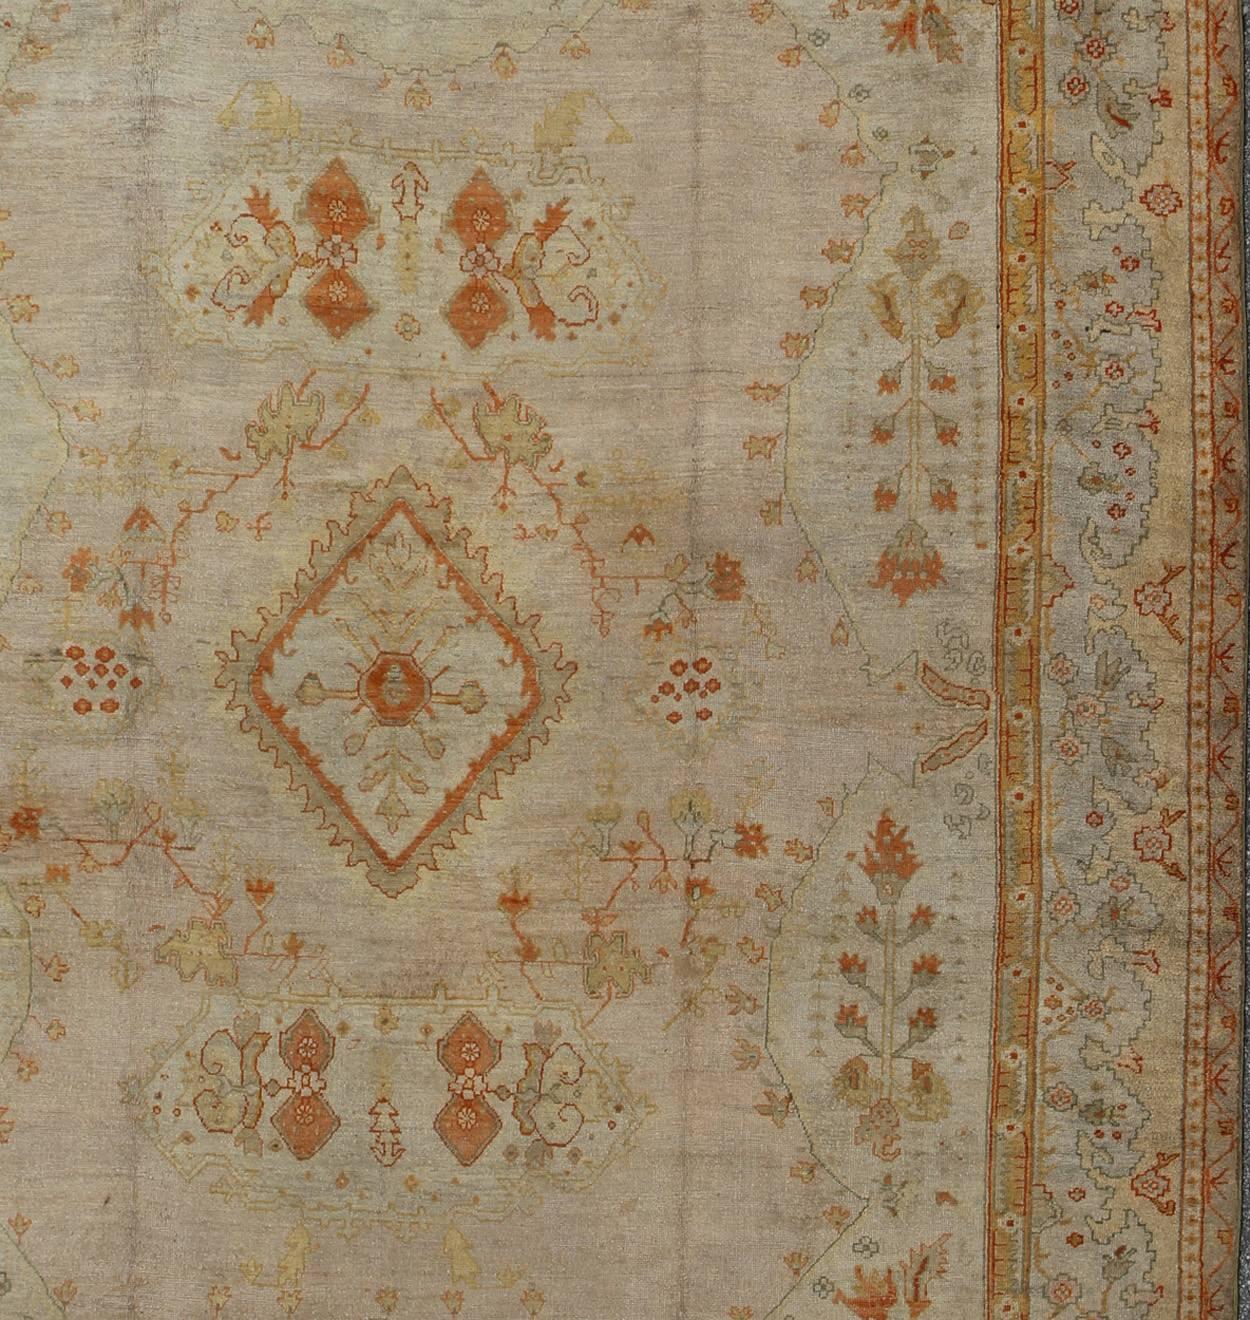 19th Century Antique Turkish Oushak Rug in green, Yellow, blush, apricot and light blue